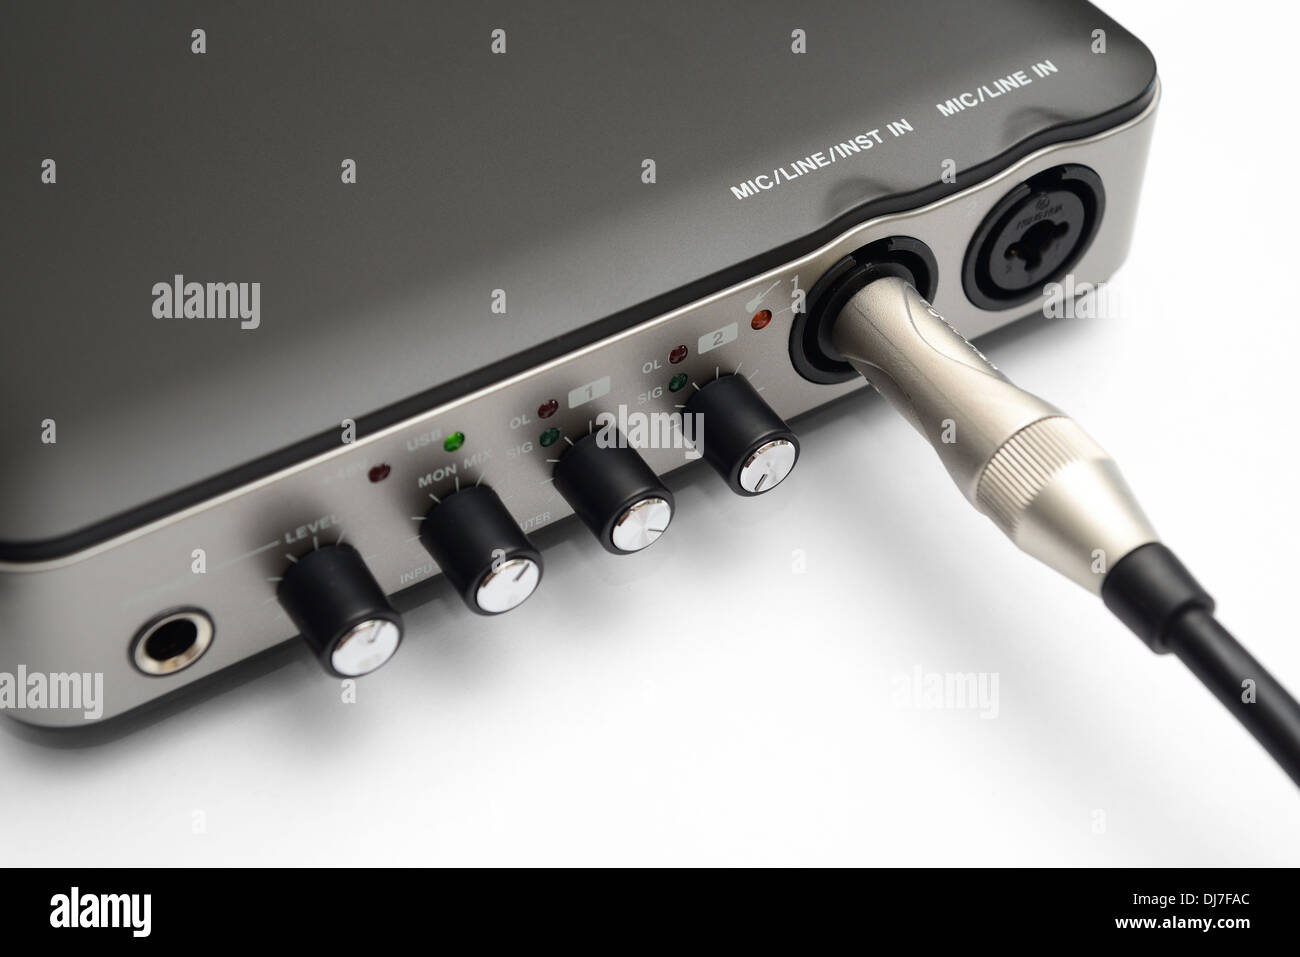 Audio Interface and Cable Stock Photo